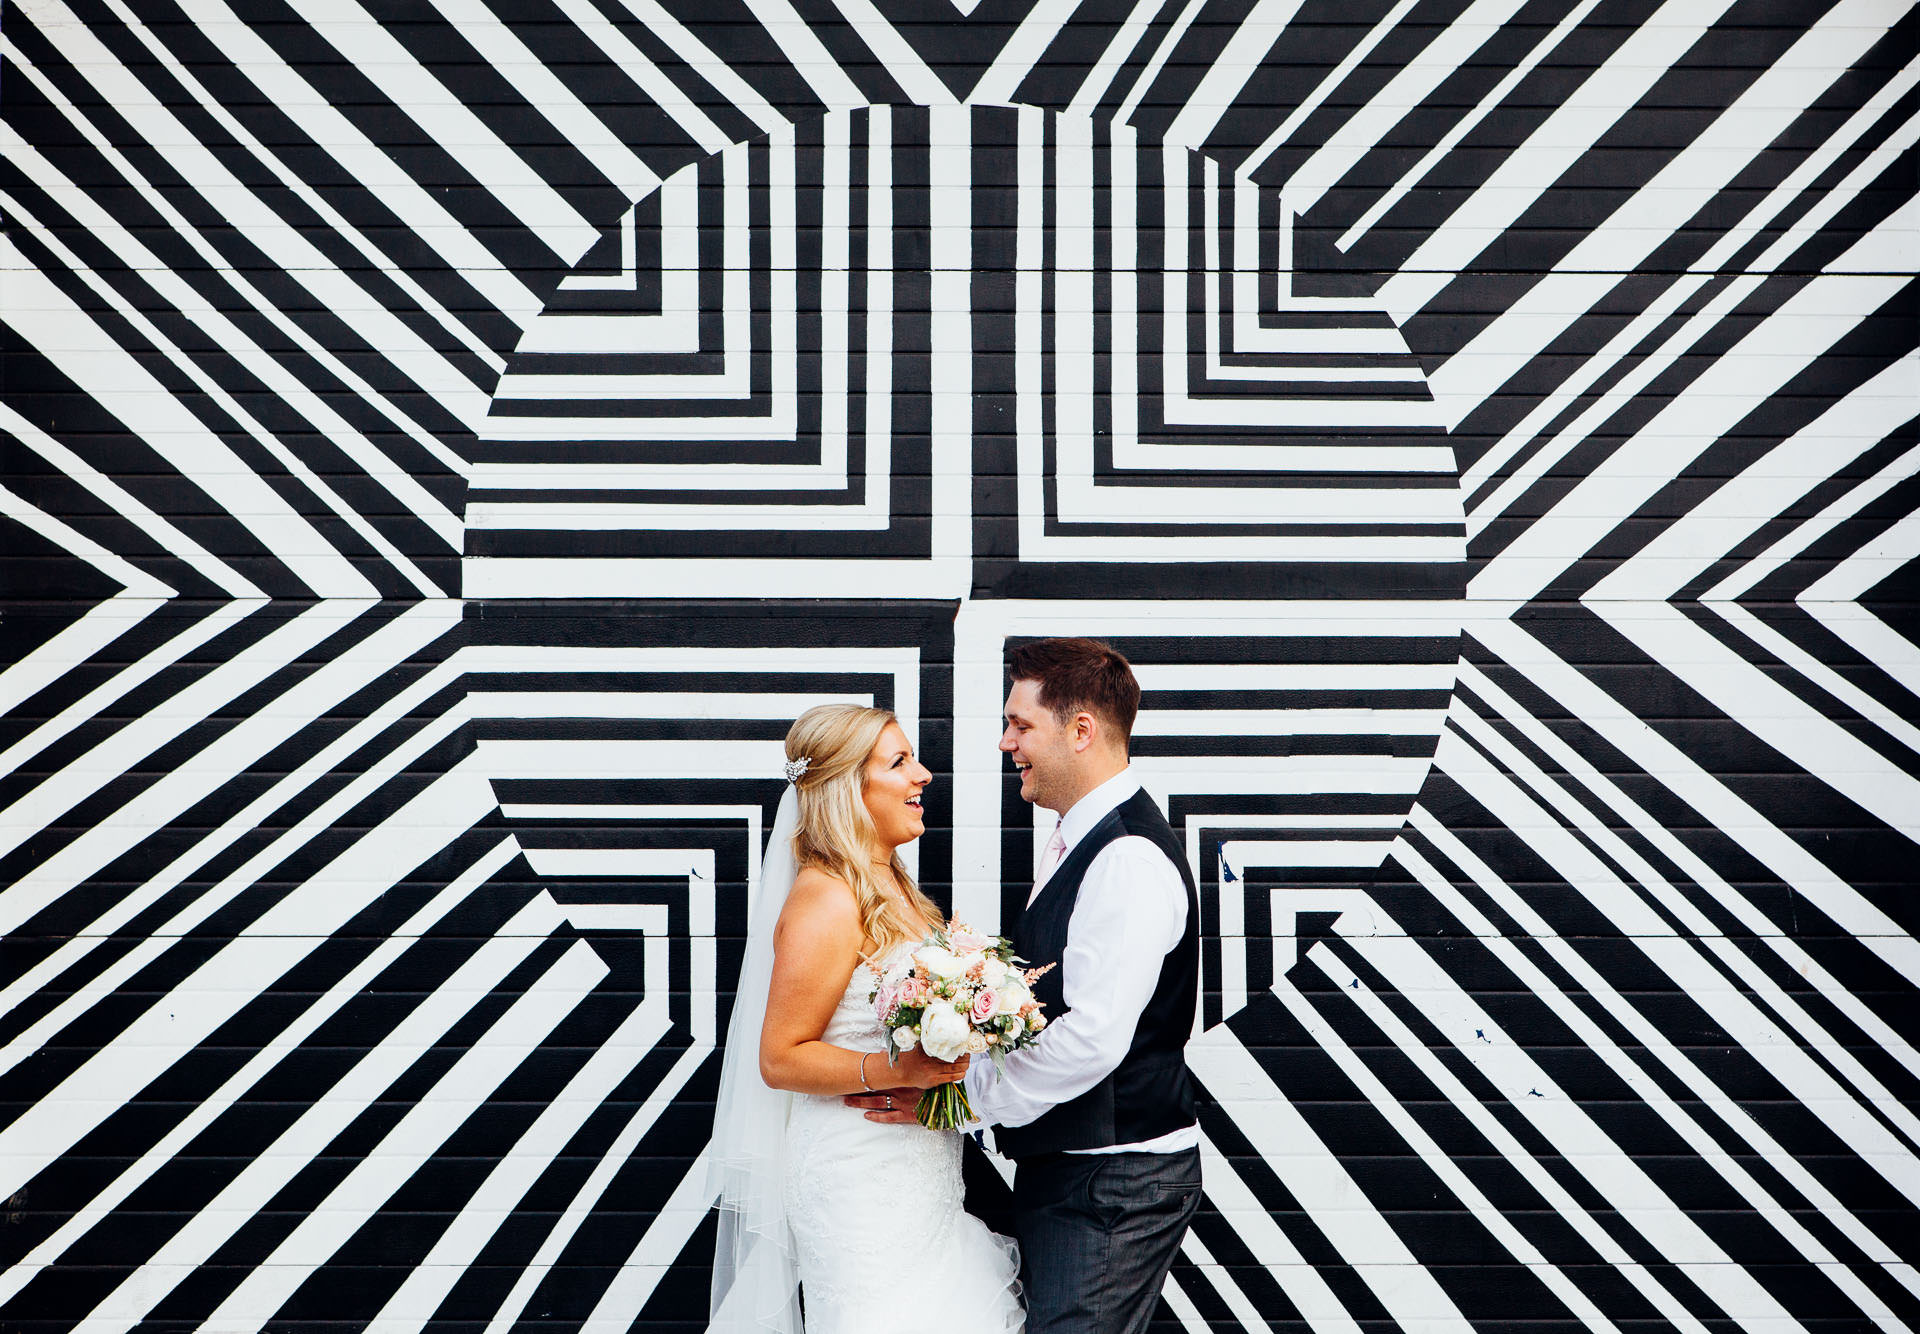 Bride and groom at Fazeley Studios wedding in front of a black and white wall of geometric shapes